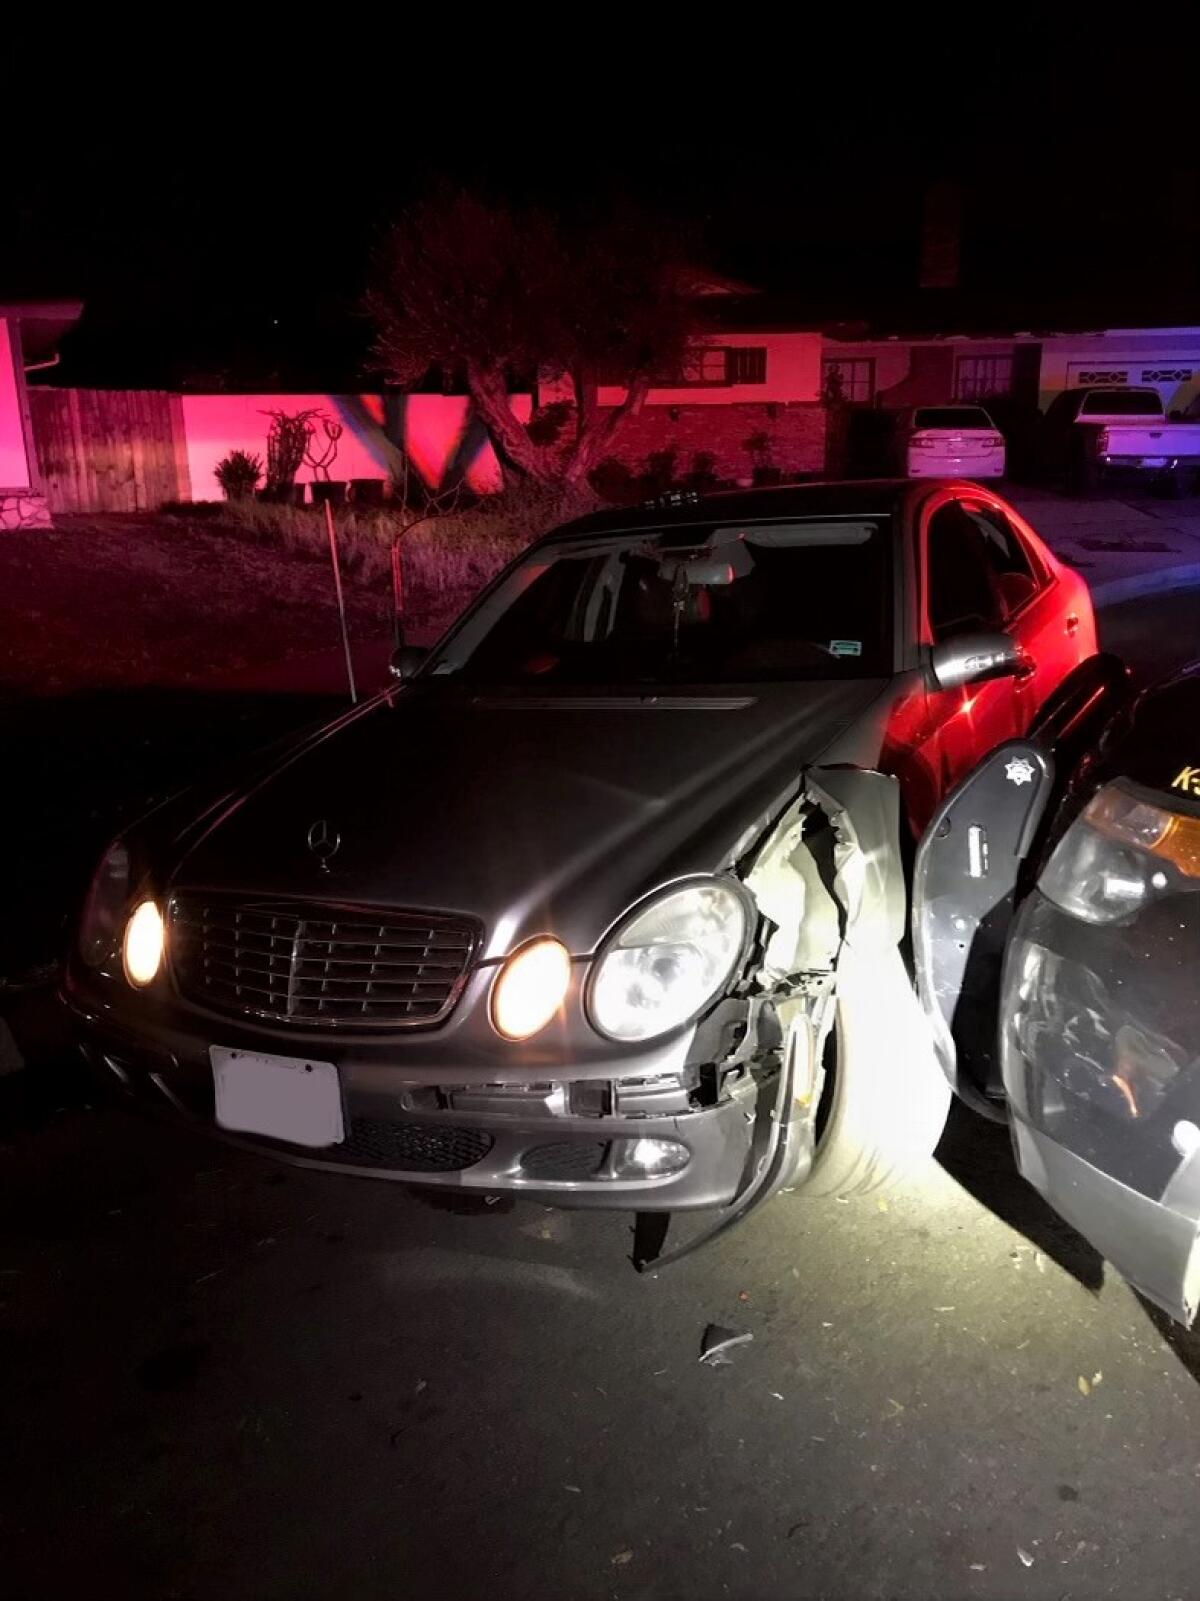 A Mercedes collided with sheriff's deputies during a Jan. 4 incident that led to the arrest of theft suspects.